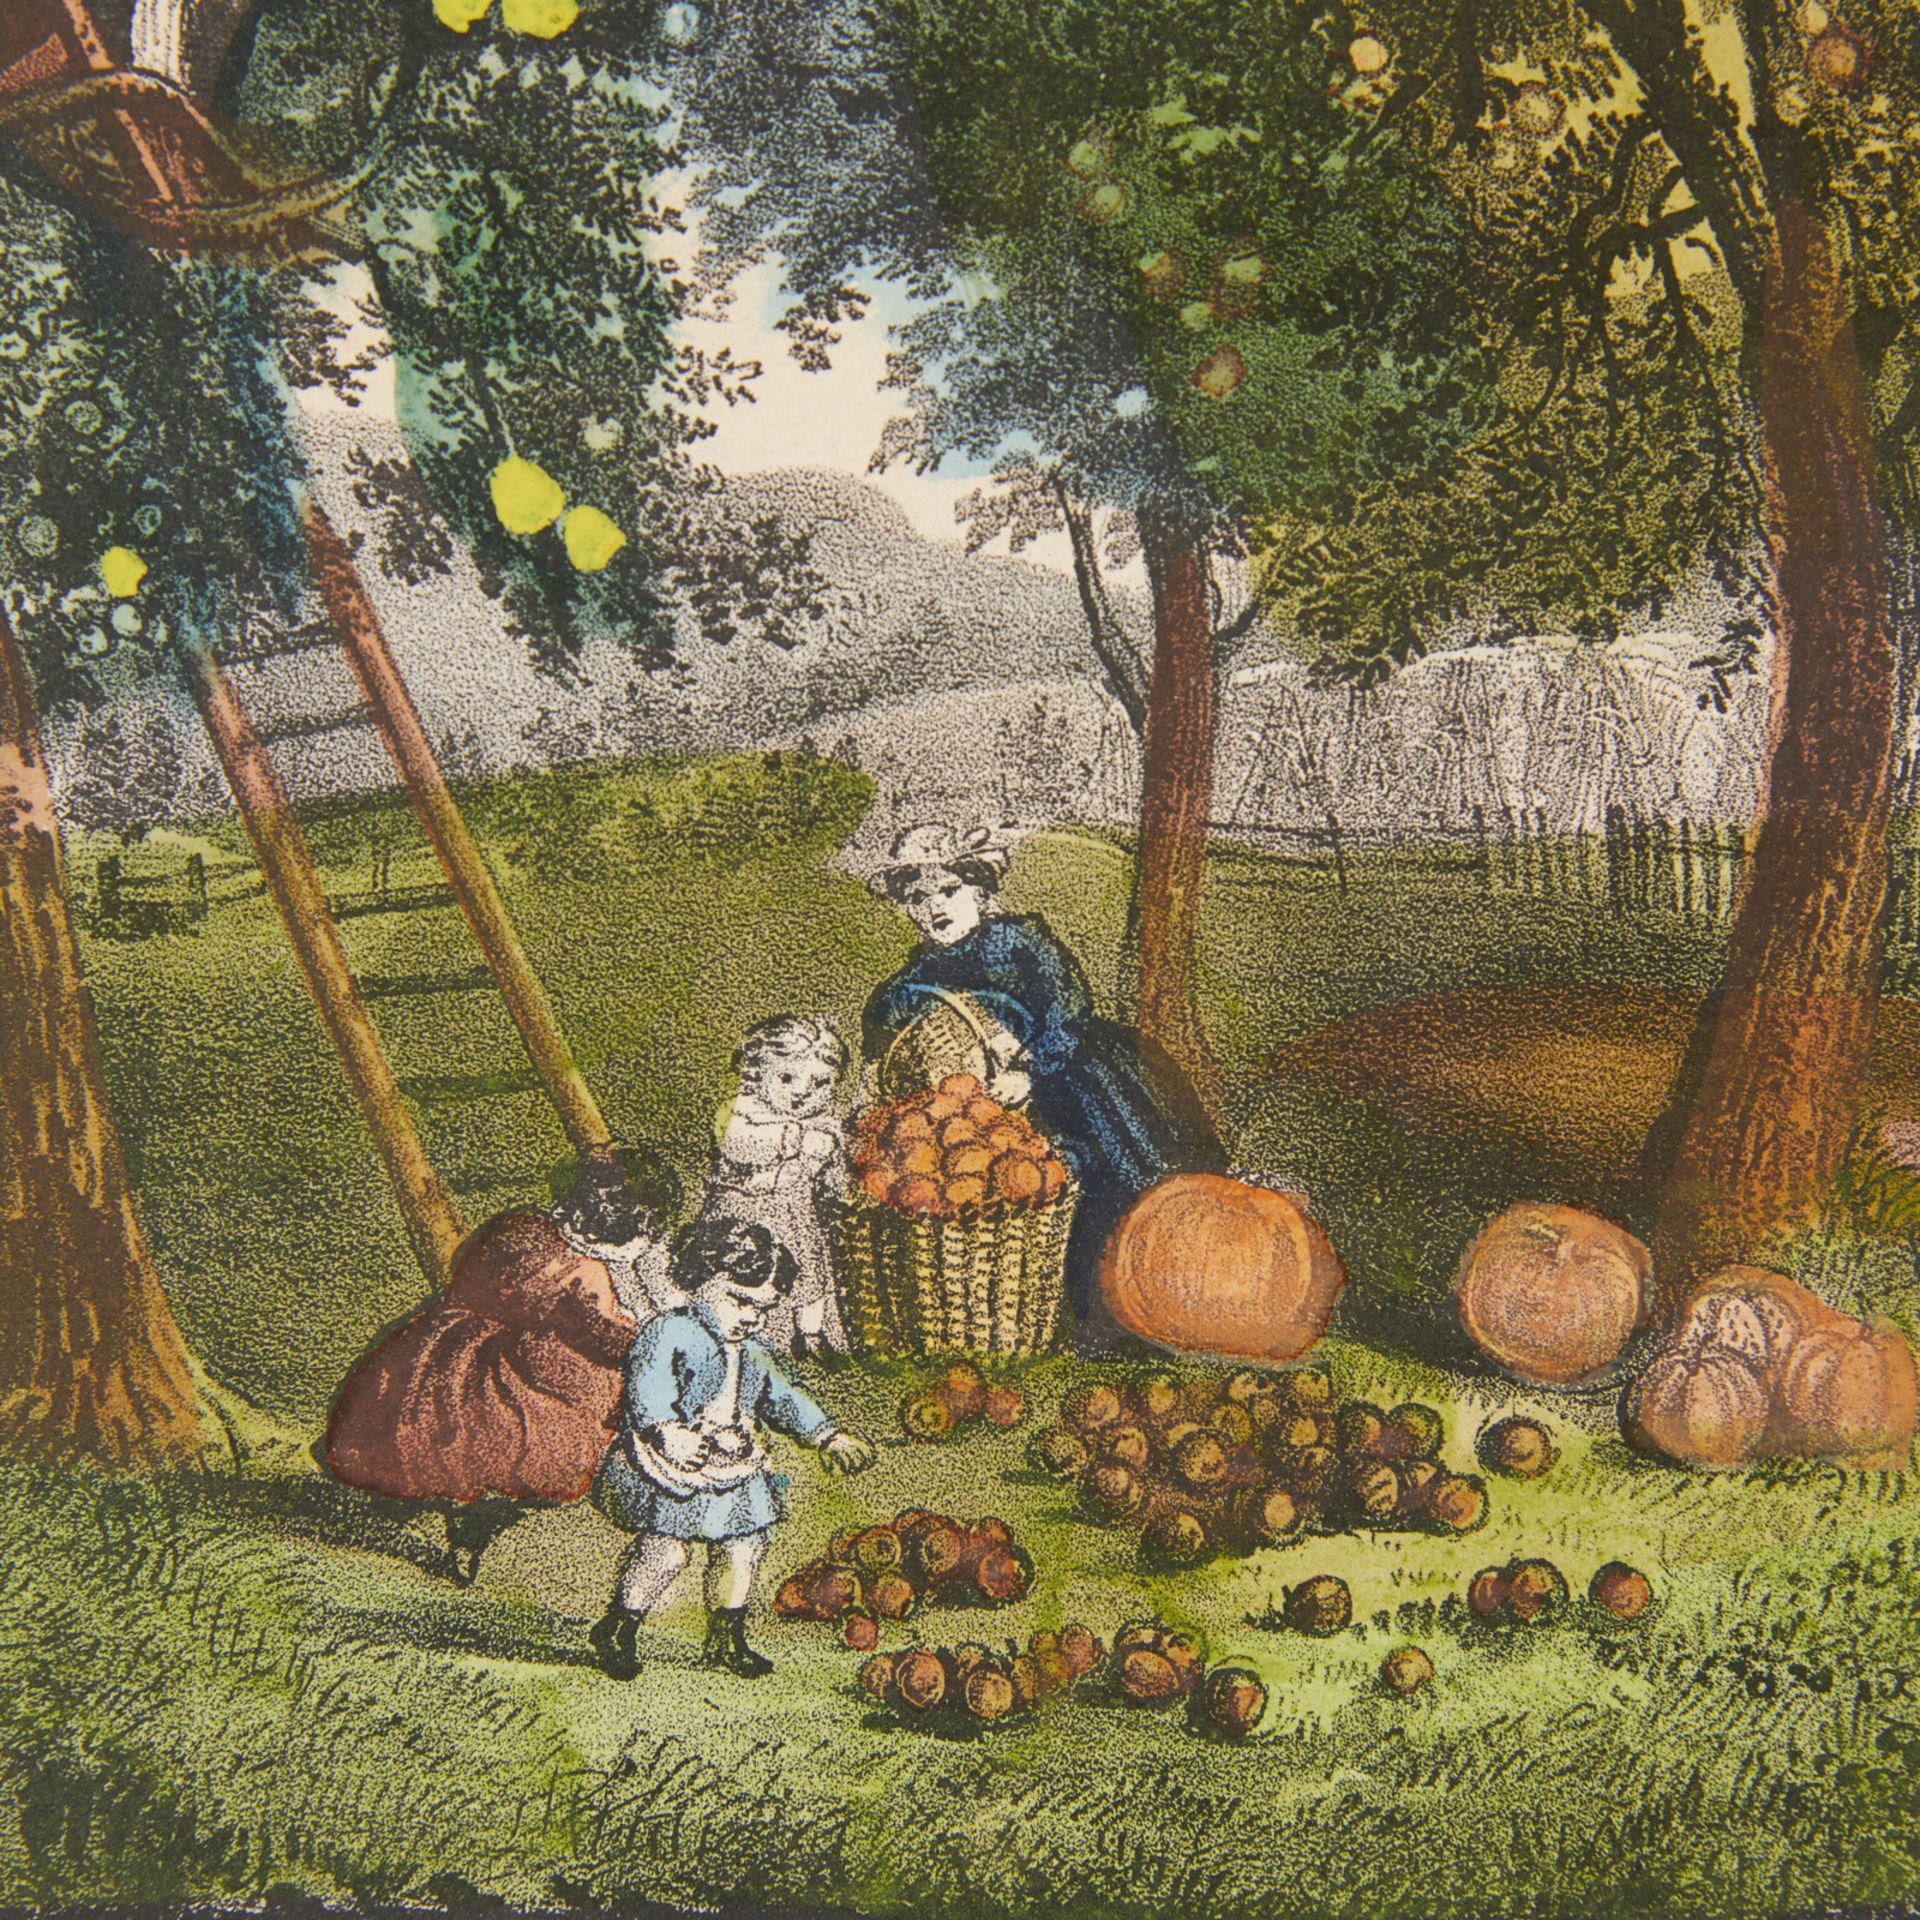 Currier & Ives "American Homestead Autumn" 1869 - Image 6 of 8